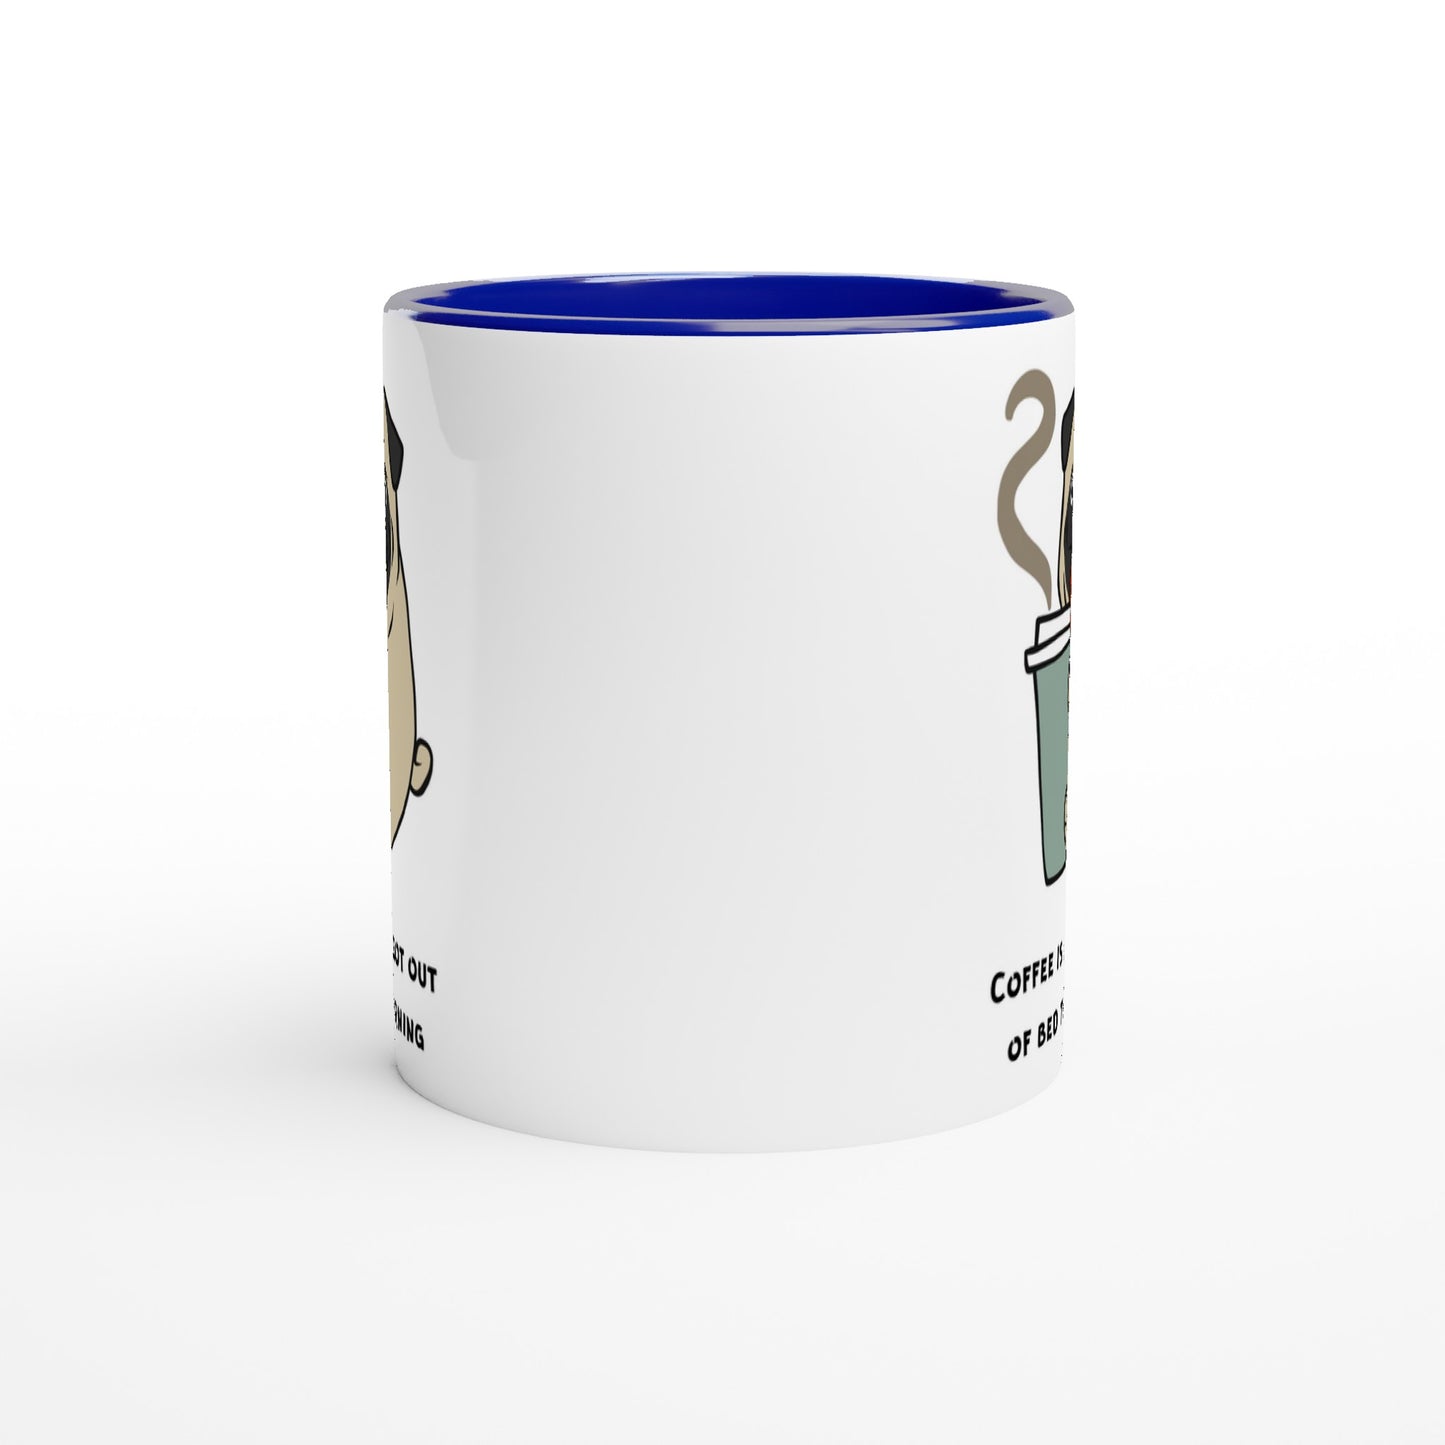 Coffee Is Why I Got Out Of Bed This Morning - White 11oz Ceramic Mug with Colour Inside Colour 11oz Mug animal coffee